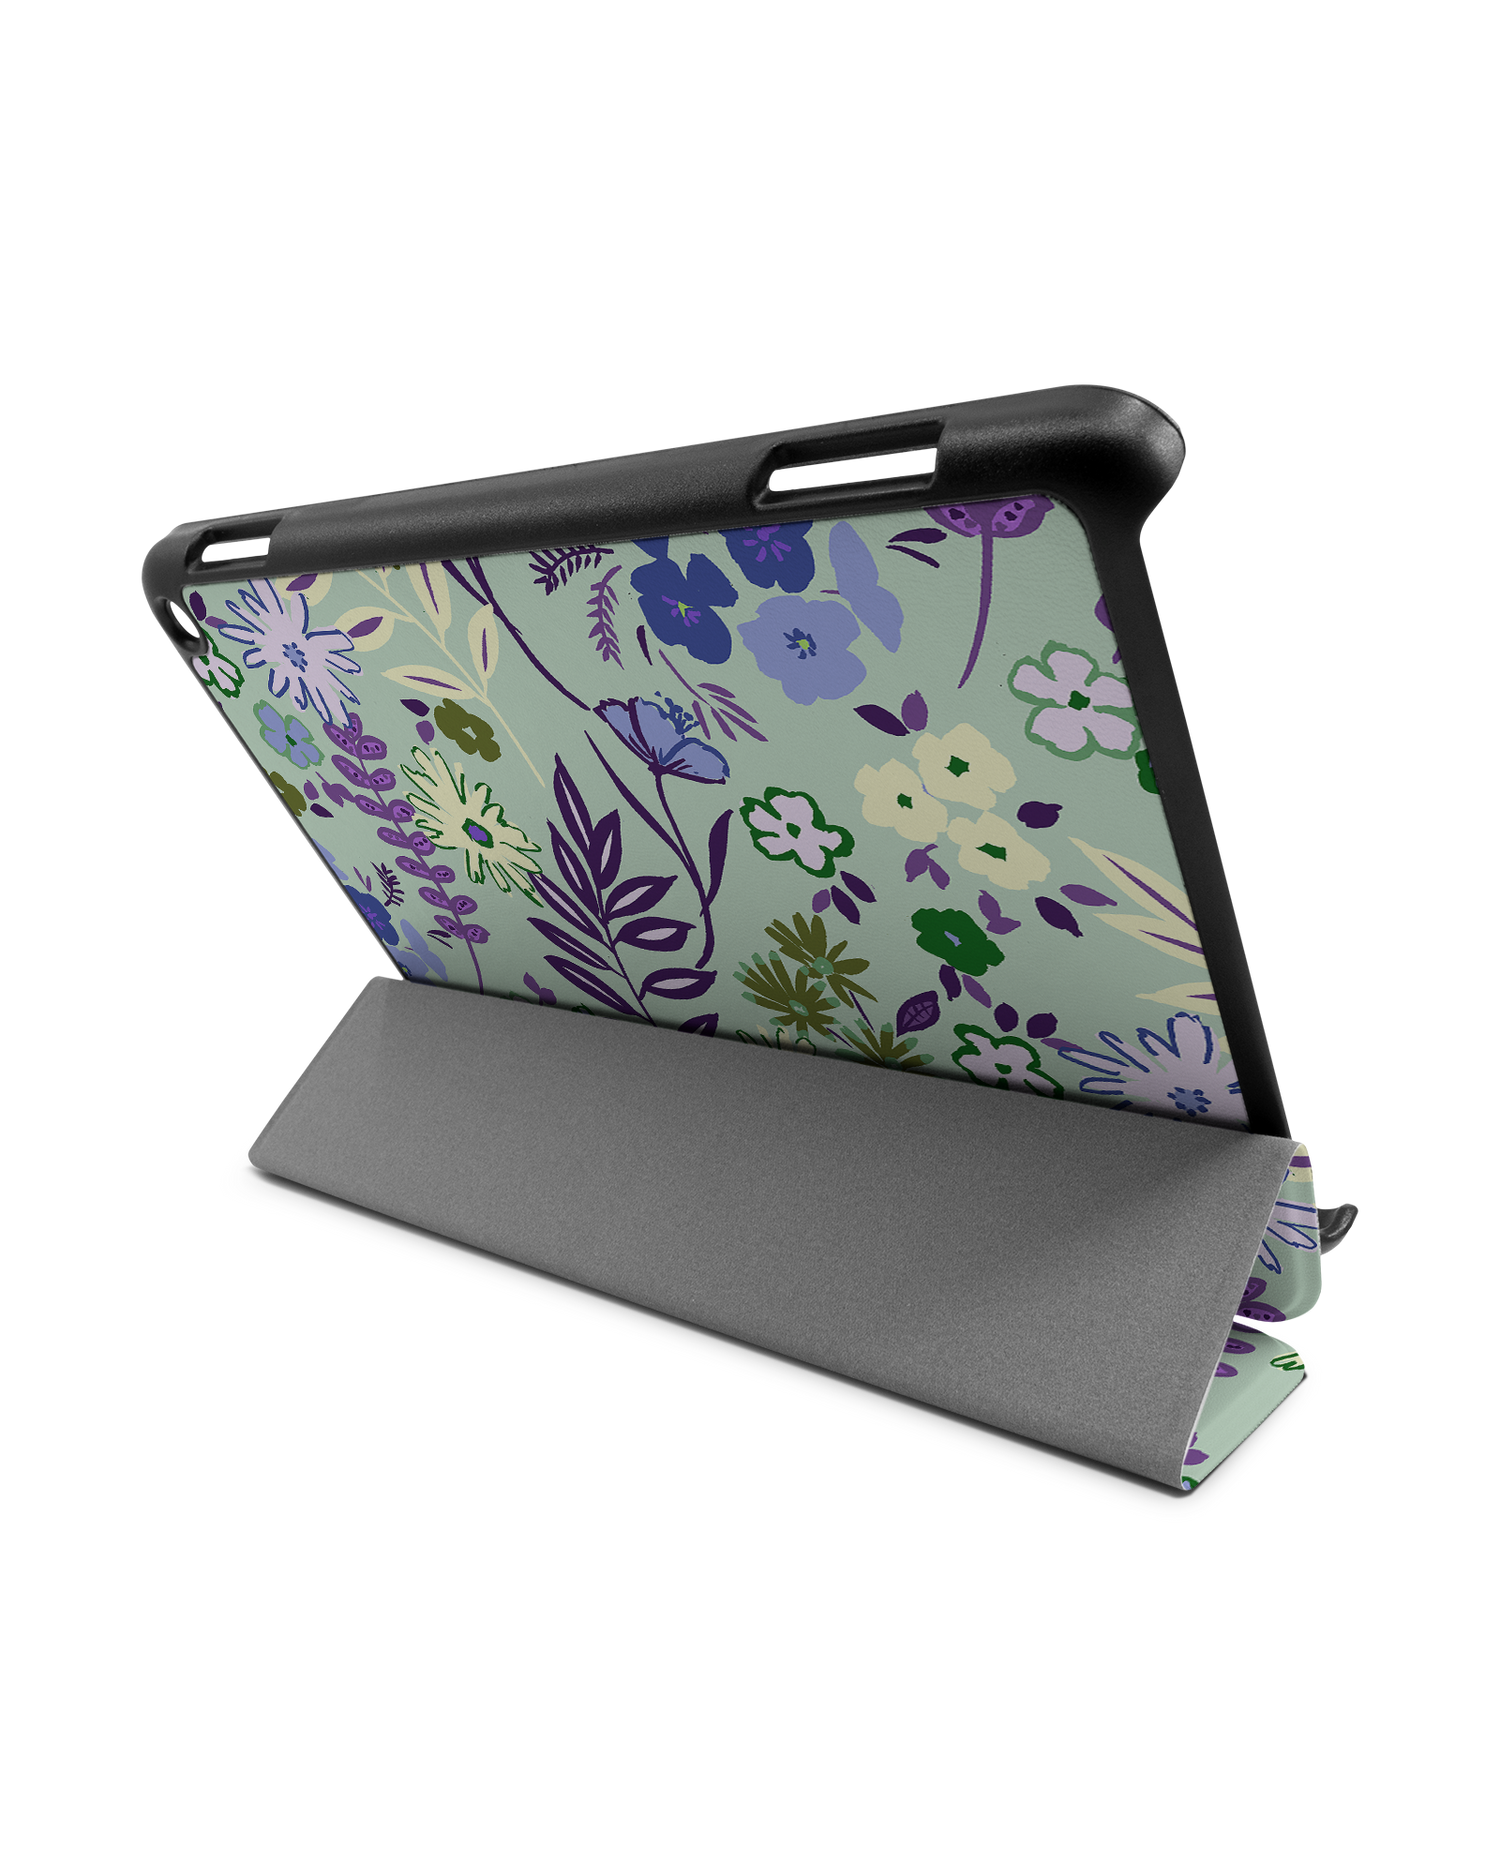 Pretty Purple Flowers Tablet Smart Case for Amazon Fire HD 8 (2022), Amazon Fire HD 8 Plus (2022), Amazon Fire HD 8 (2020), Amazon Fire HD 8 Plus (2020): Used as Stand